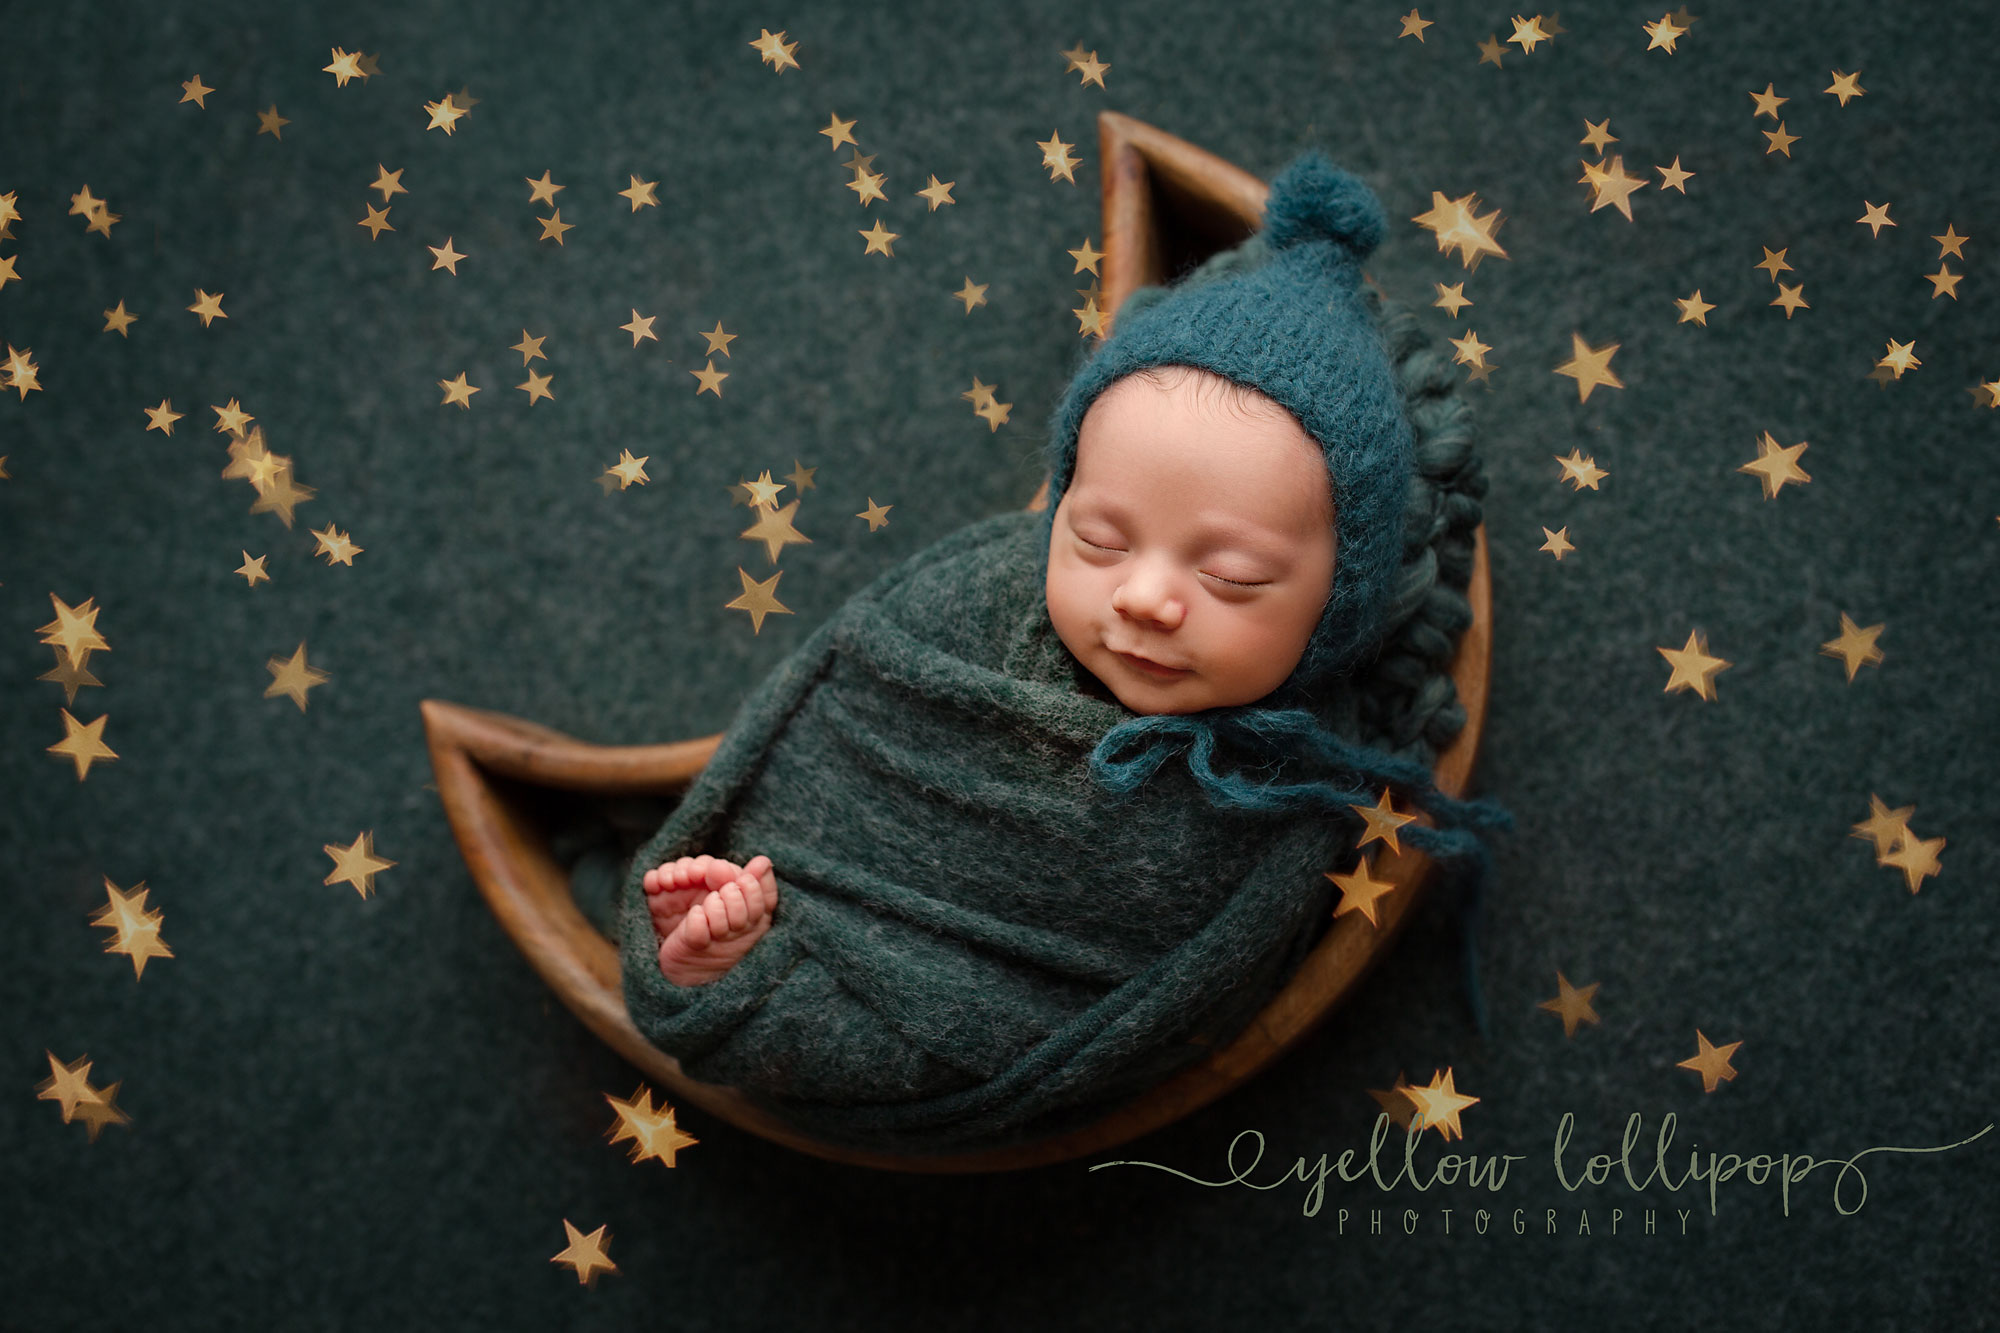 Newborn Mini Photography Sessions baby boy sleeping in a moon shaped prop